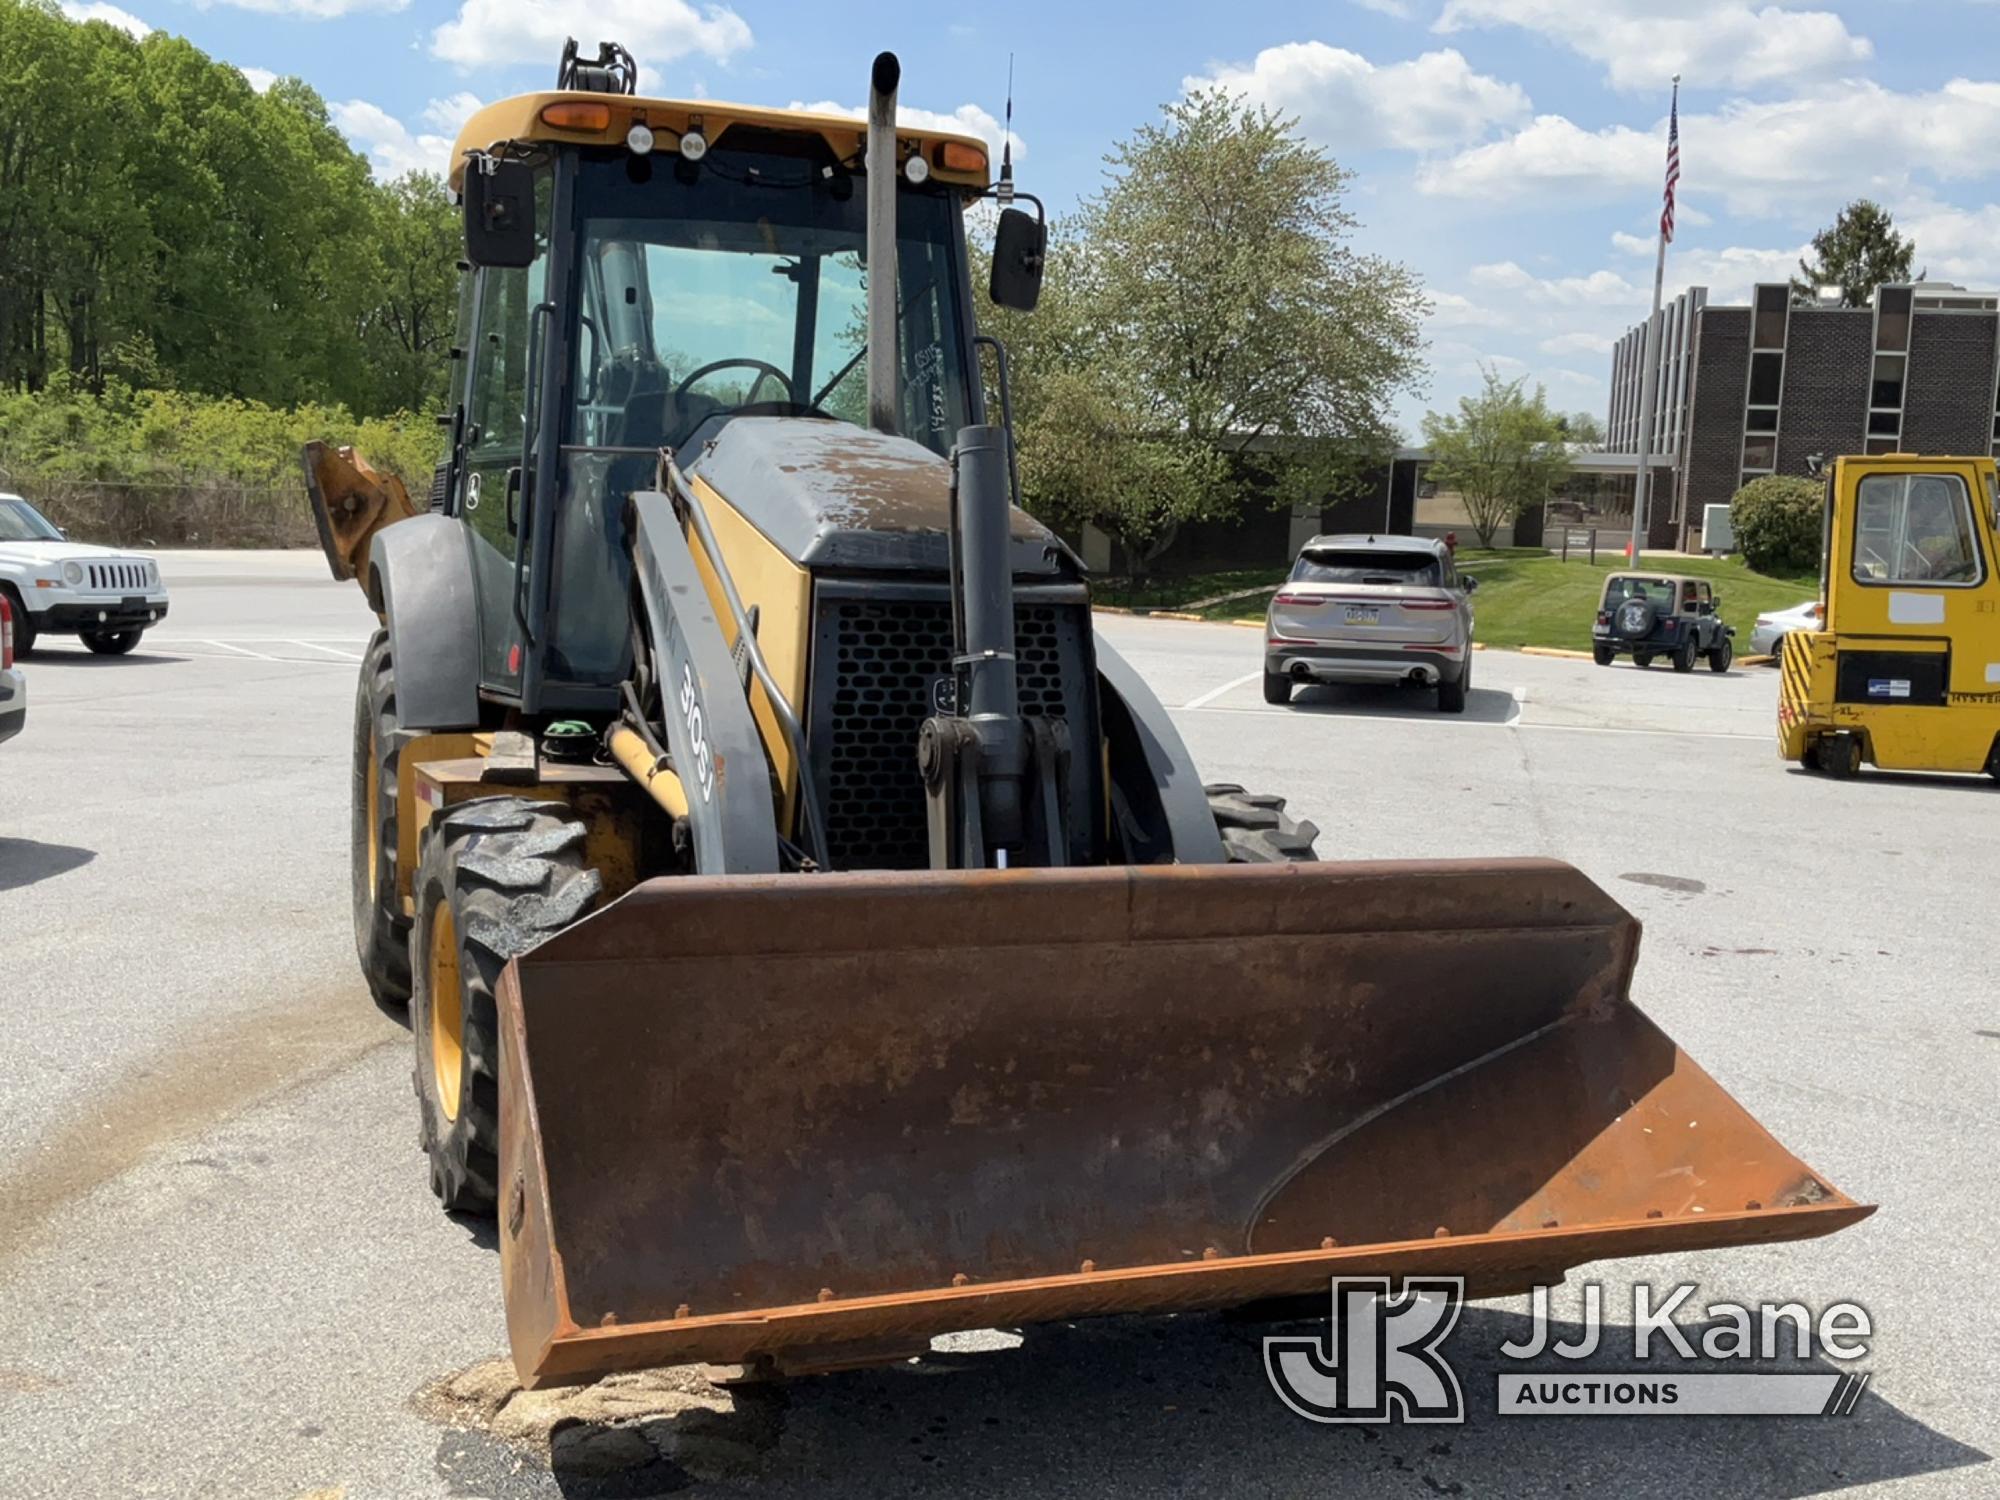 (Chester Springs, PA) 2008 John Deere 310SJ 4x4 Tractor Loader Backhoe No Title) (Runs & Moves, Hyd